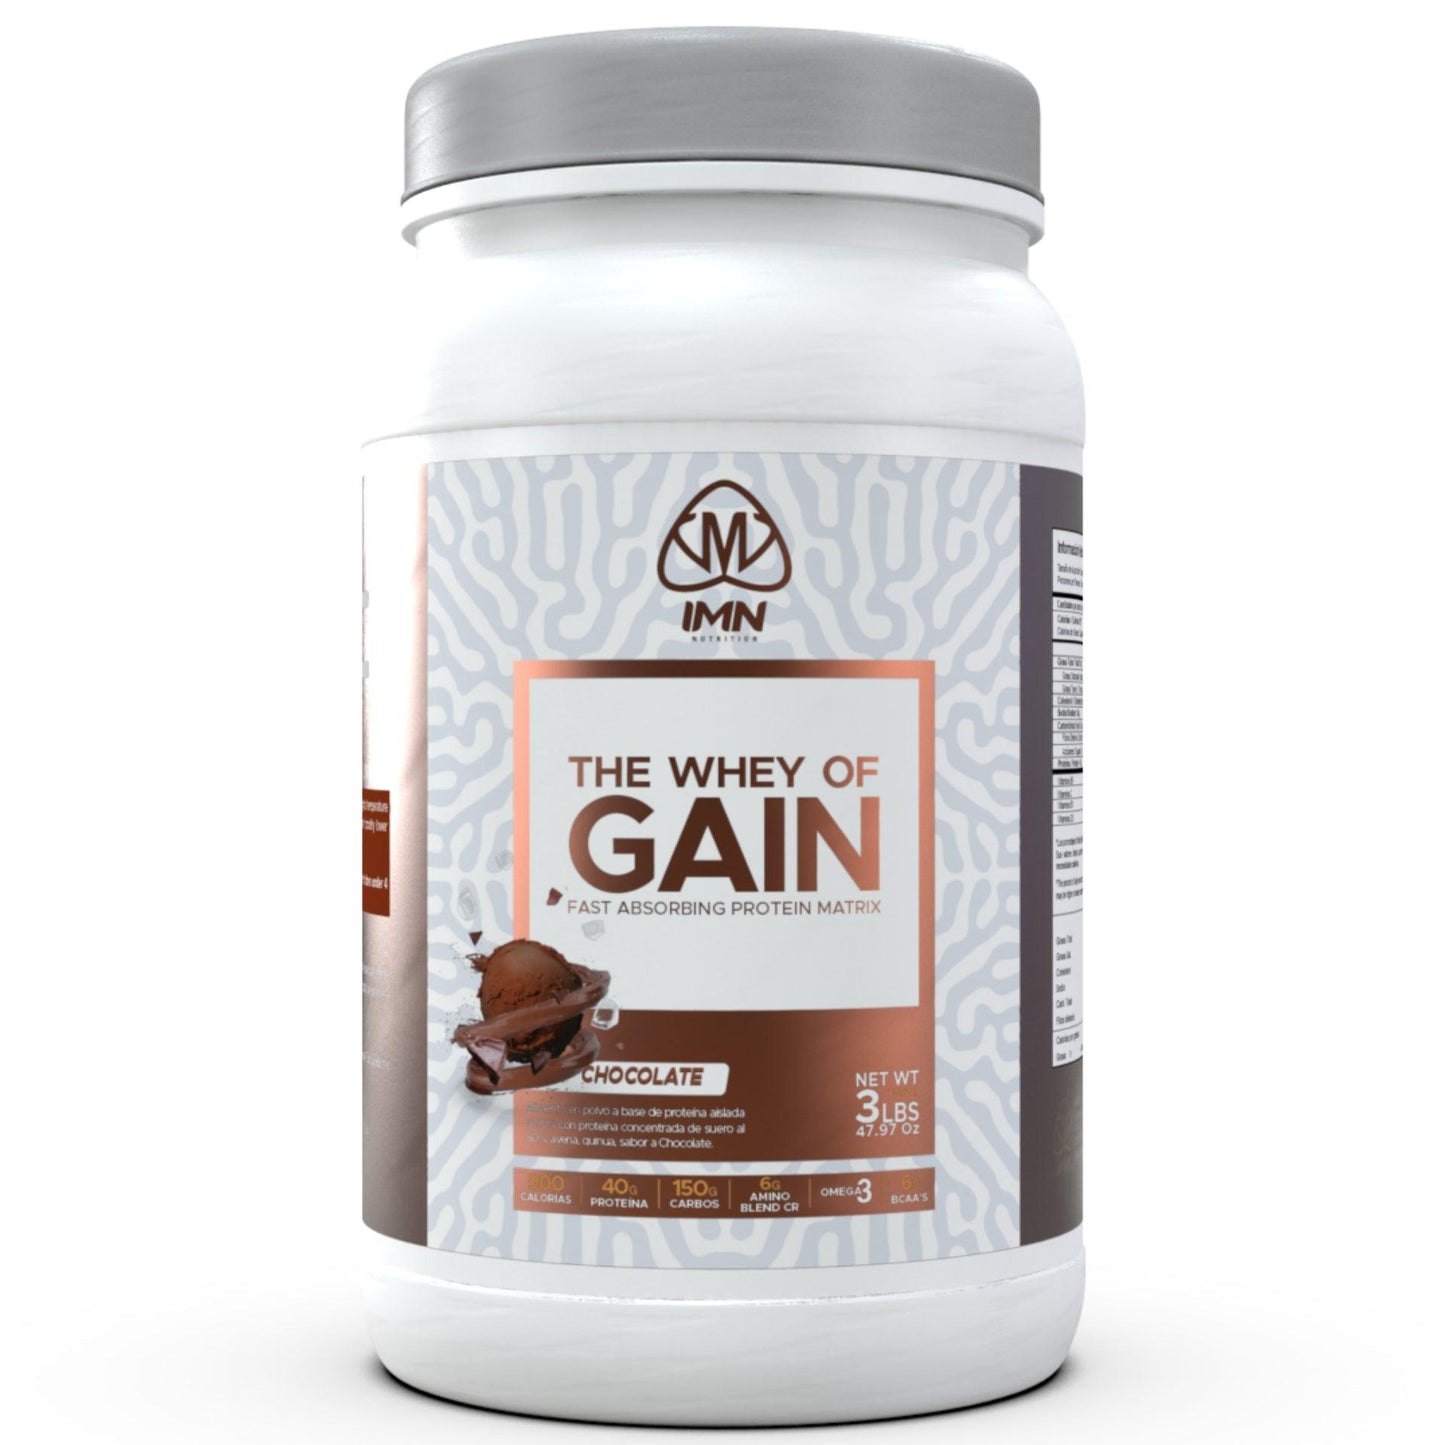 The Whey Of Gain 3 LB | IMN Nutrition - JH Nutrición